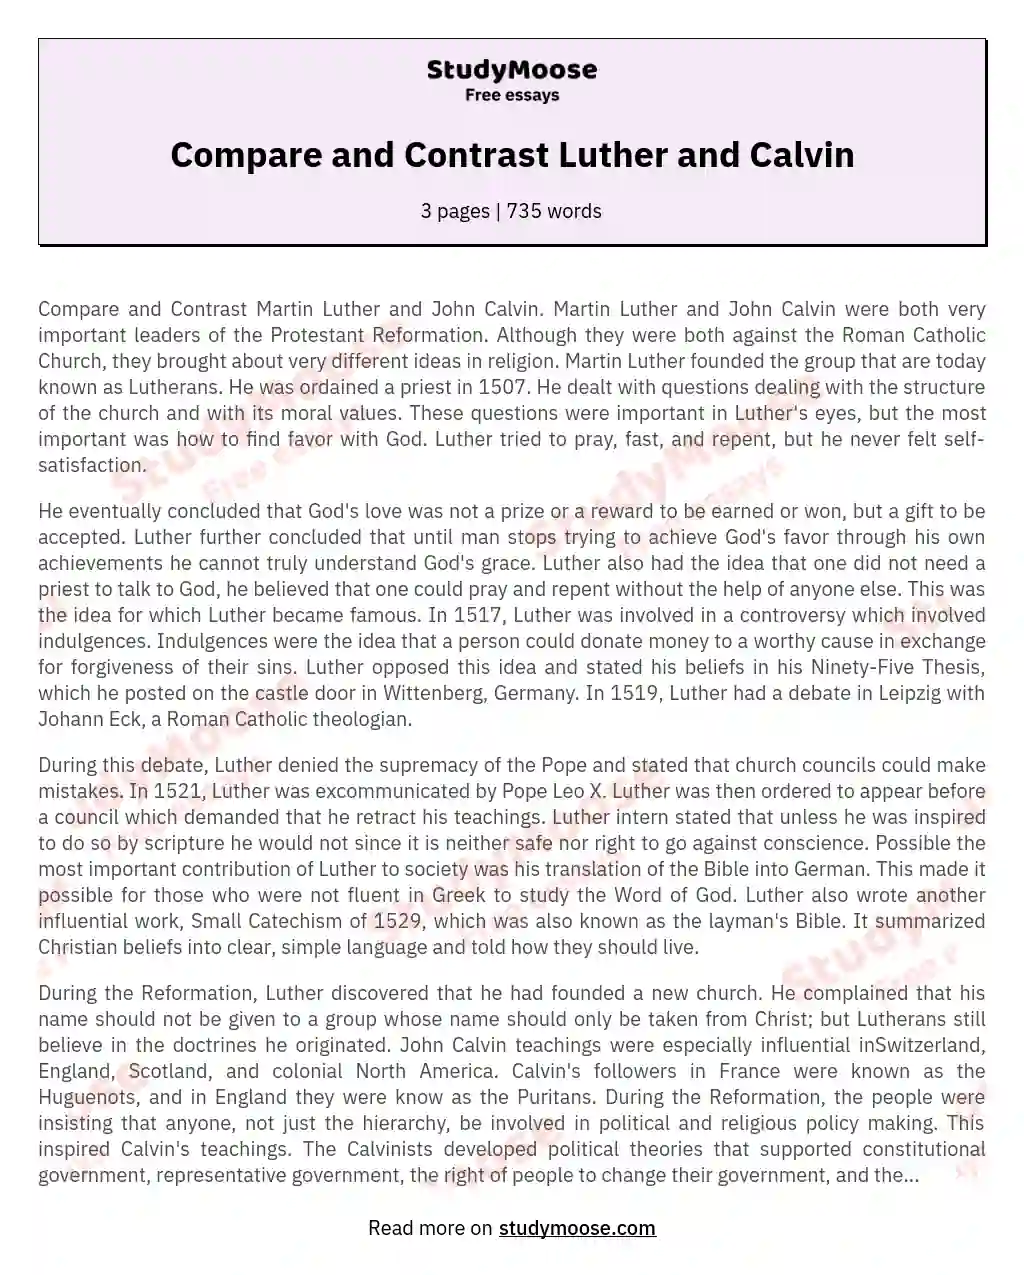 Compare and Contrast Luther and Calvin